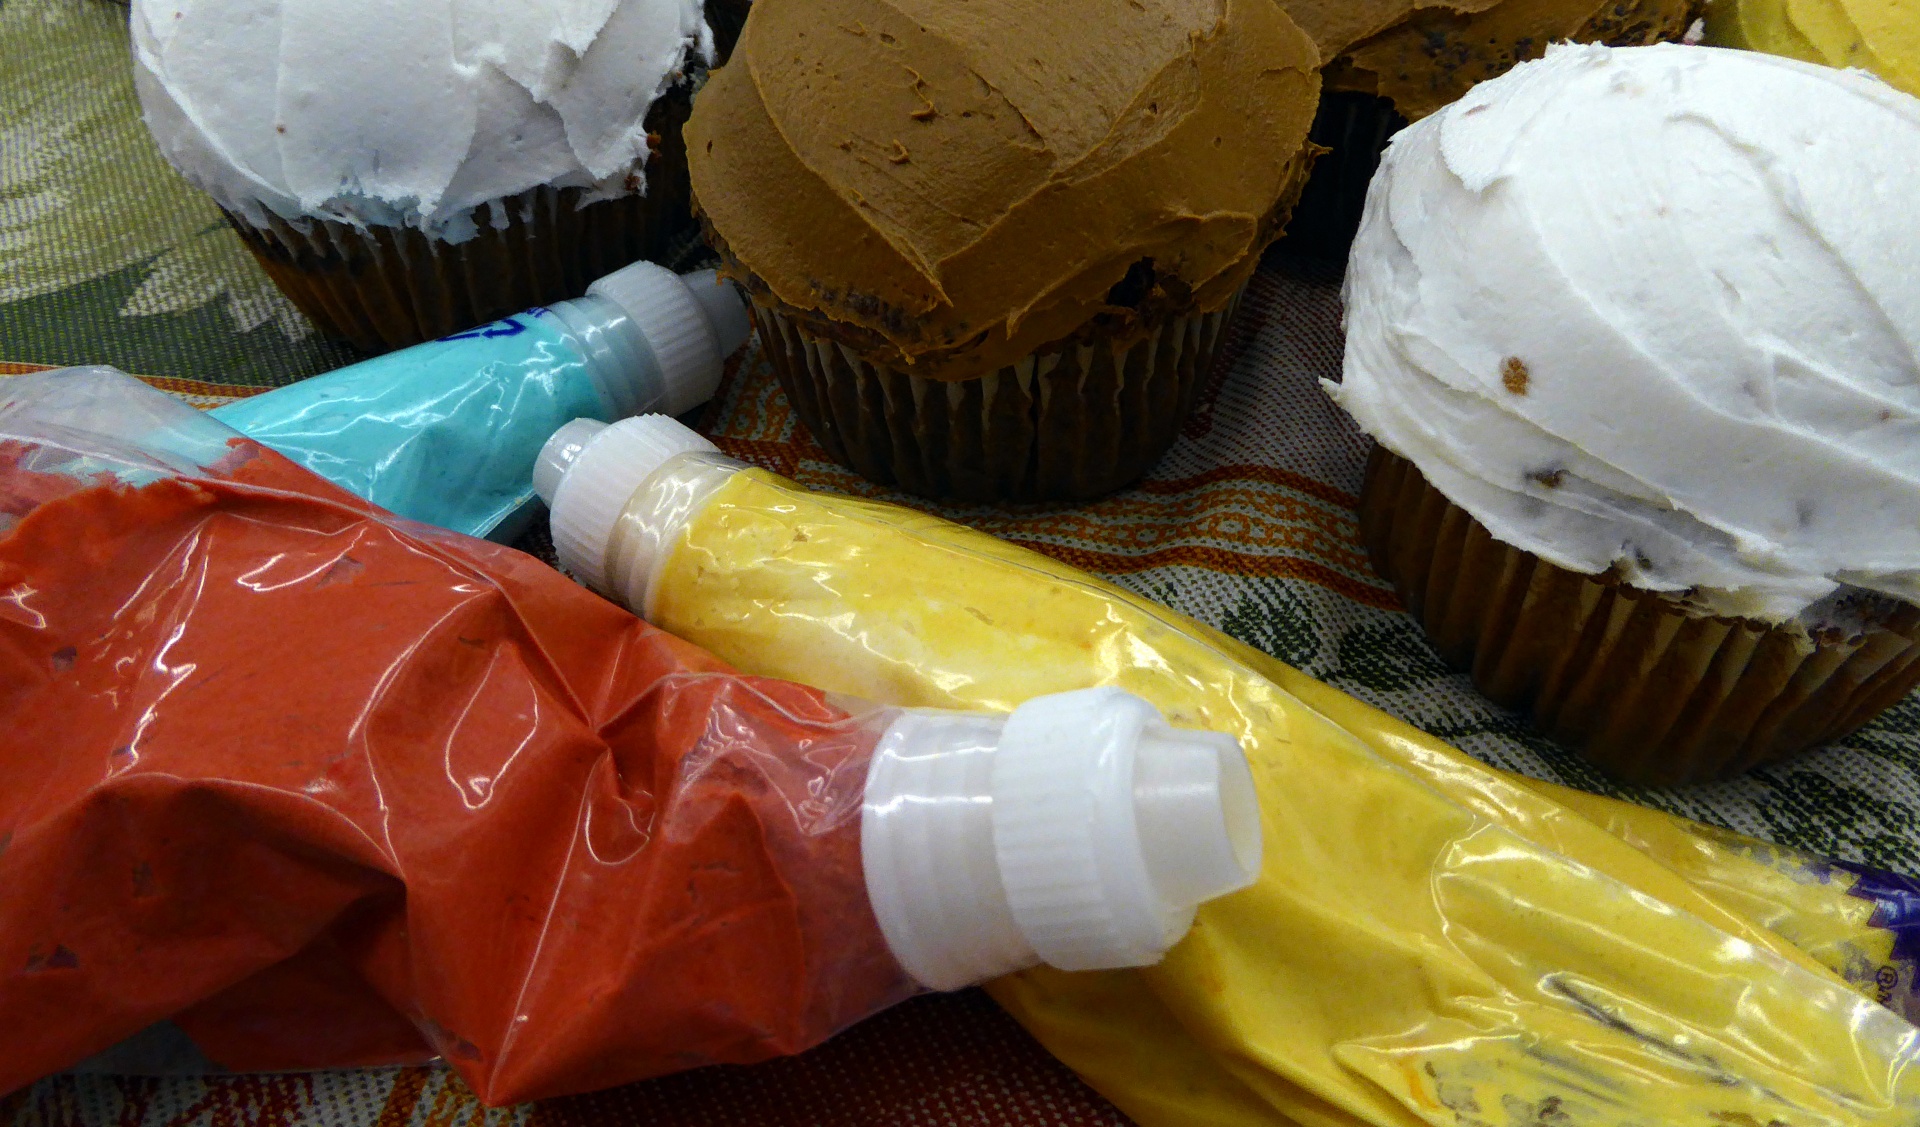 Cupcakes And Filled Pastry Tubes